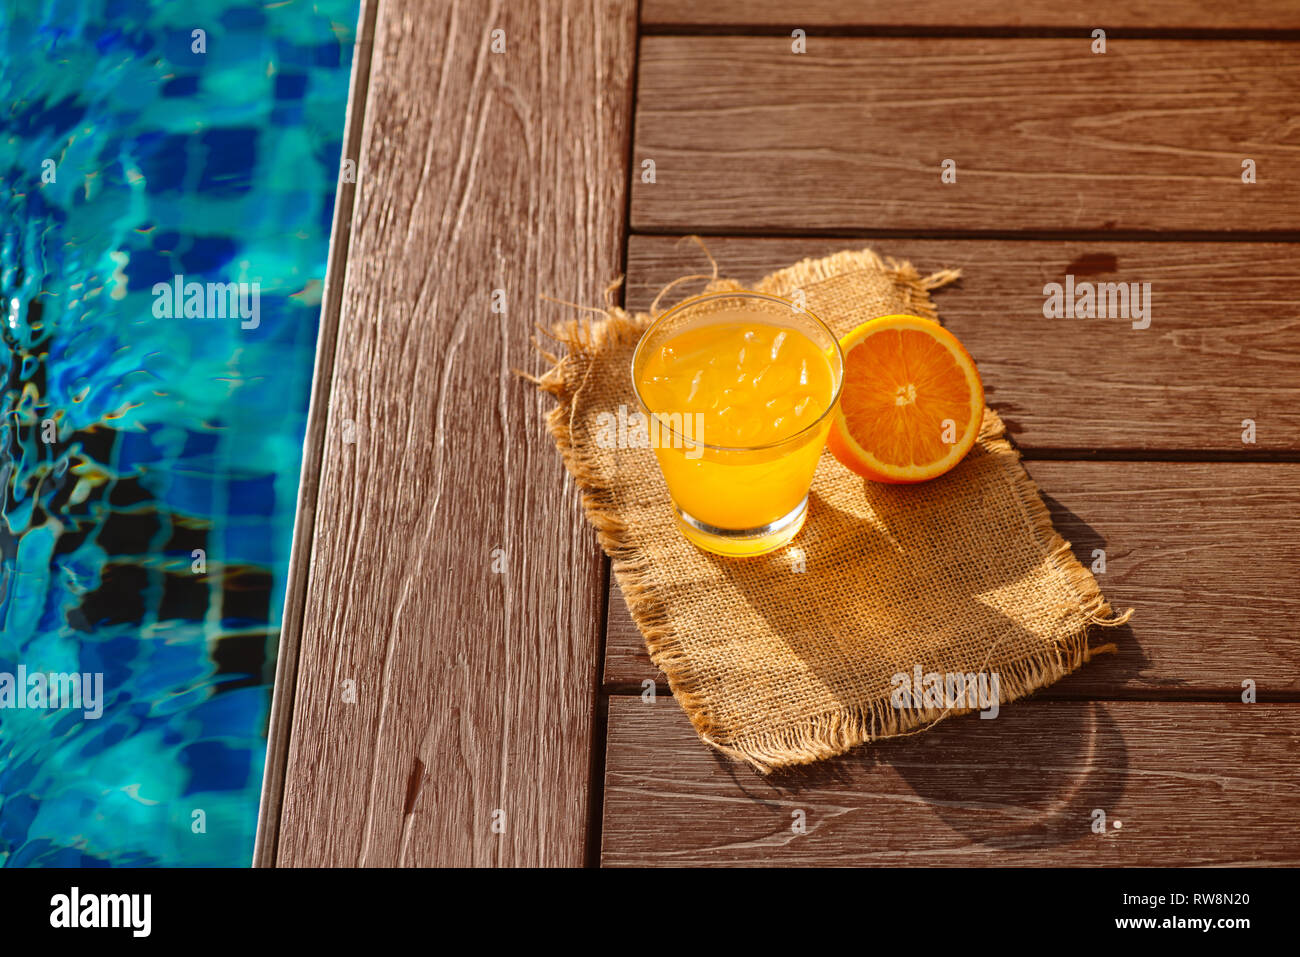 Close up of screwdriver cocktail alcohol drink with orange juice, slices and ice standing near the pool. Refreshing iced lemonade beverage in glass by Stock Photo